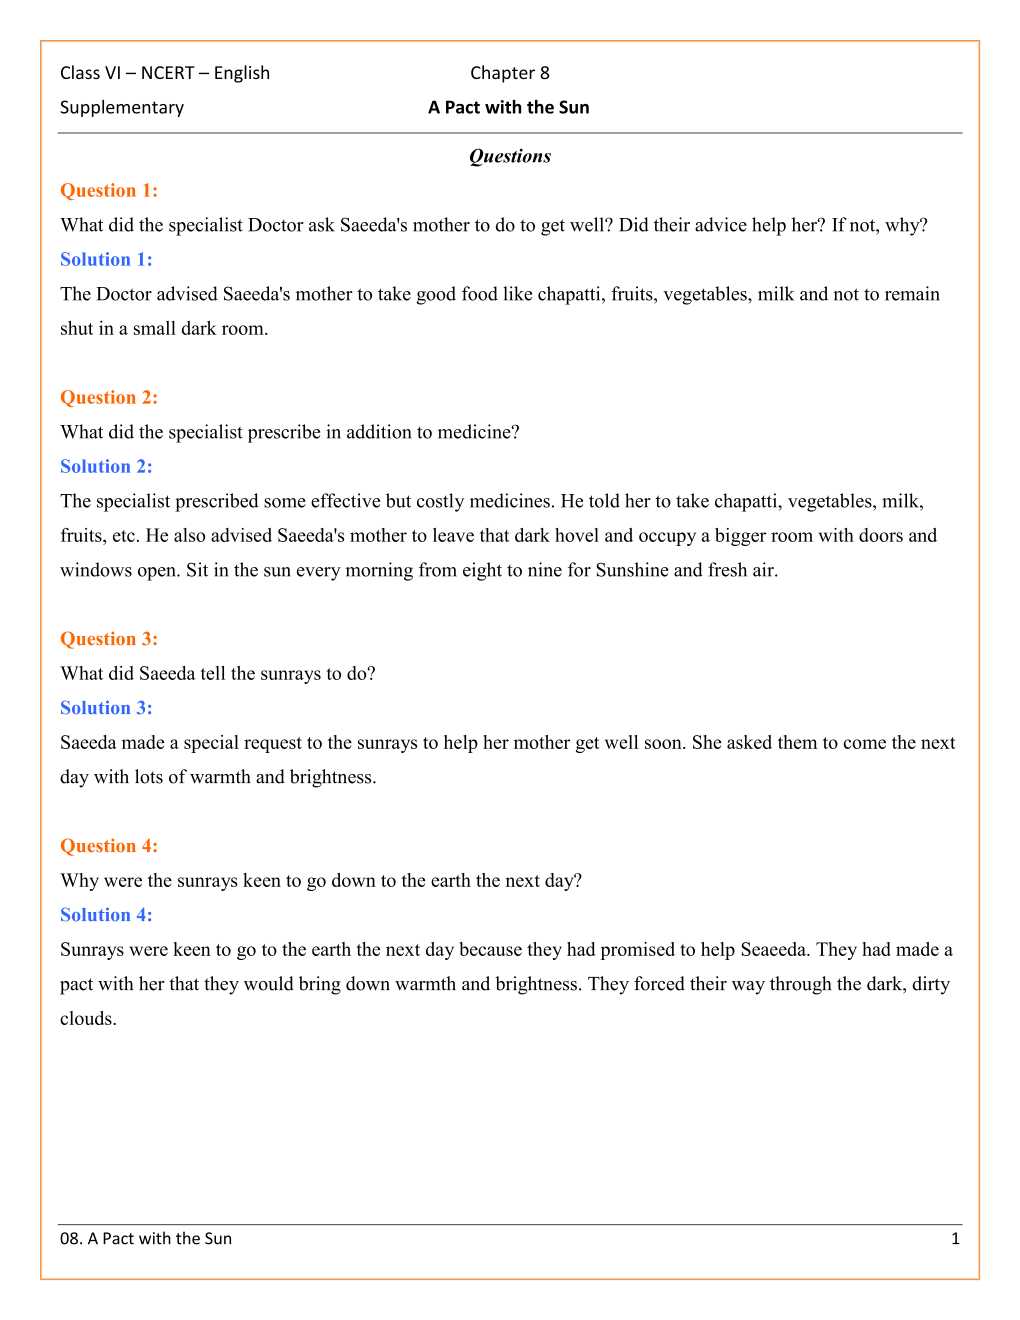 NCERT Solutions For Class 6 English A Pact With The Sun Chapter 8